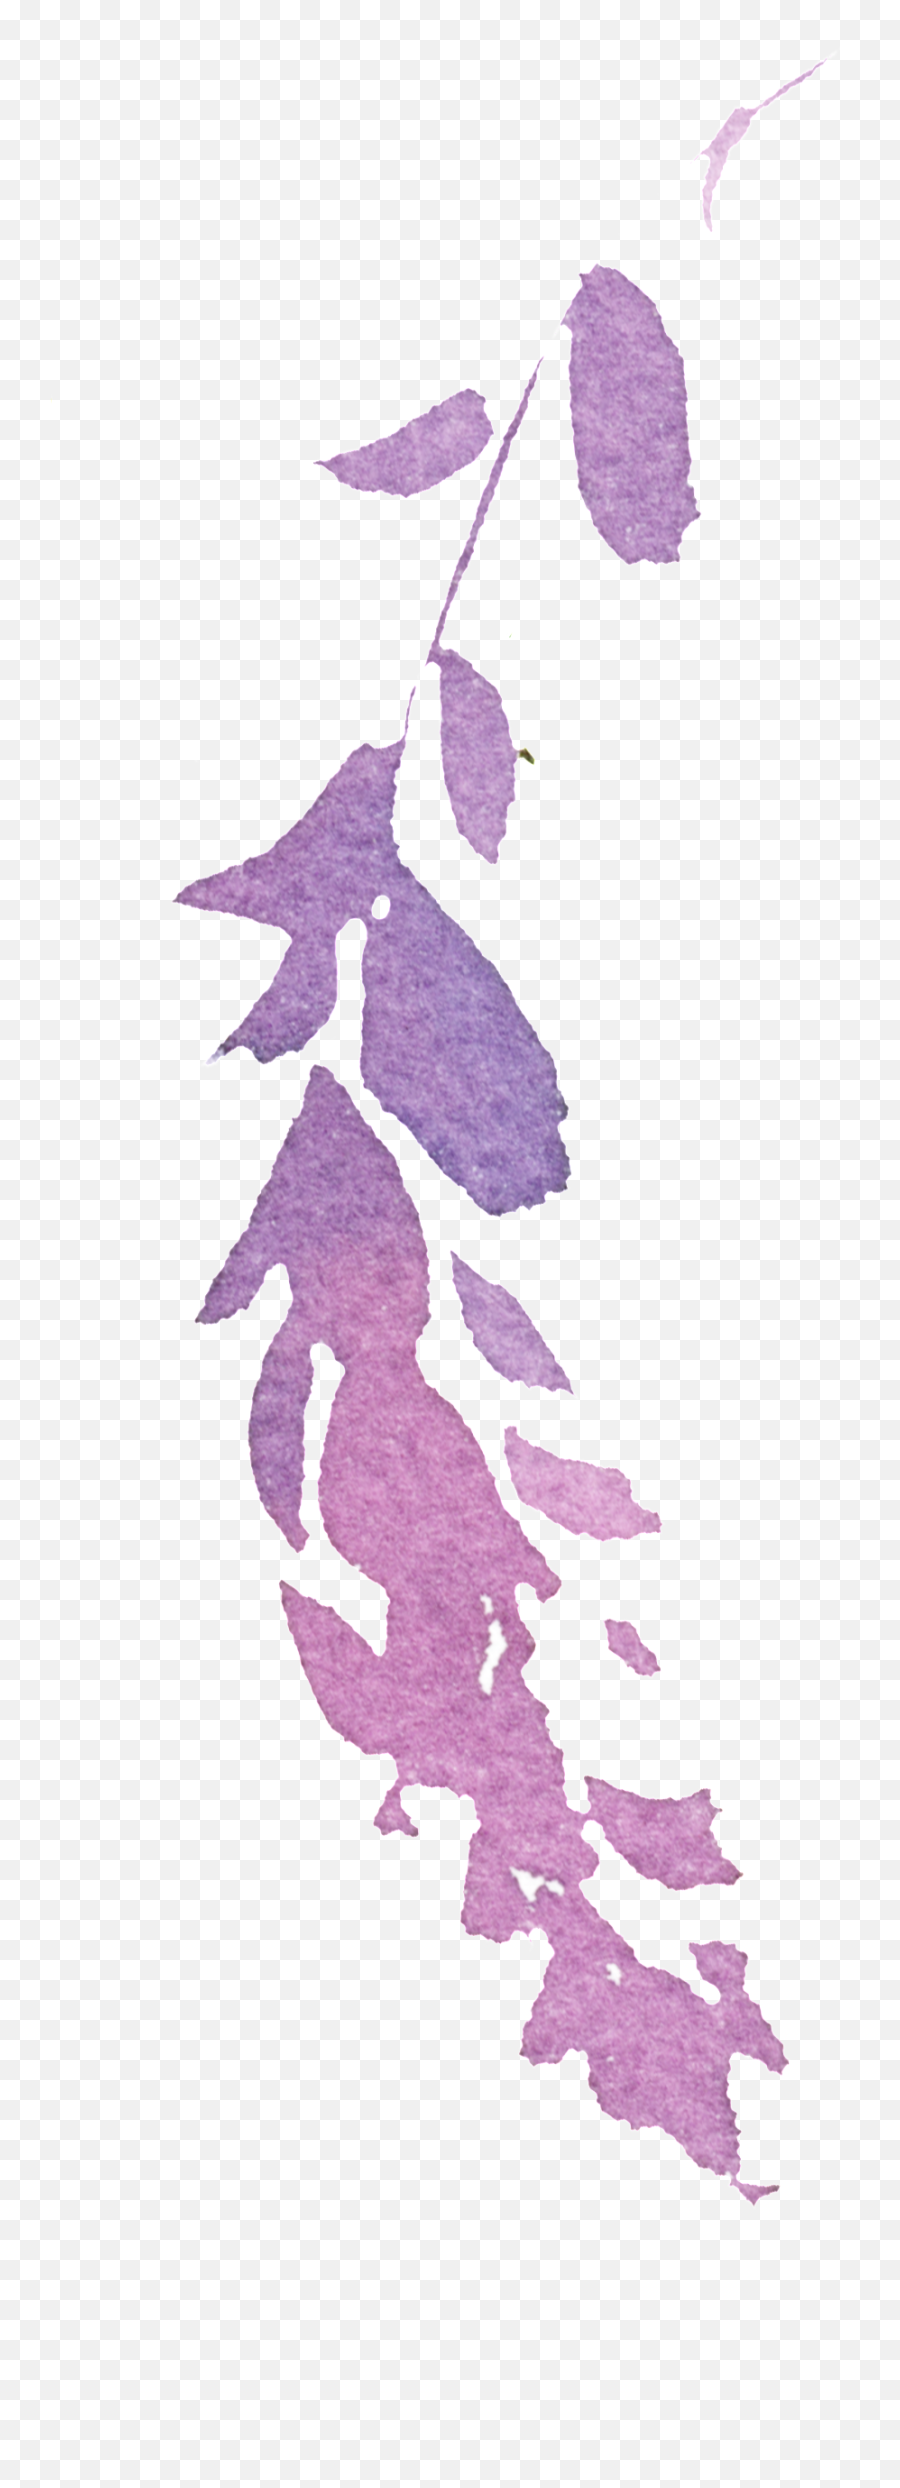 Download Hand Painted Purple Watercolor Leaves Png - Art Emoji,Watercolor Leaves Png